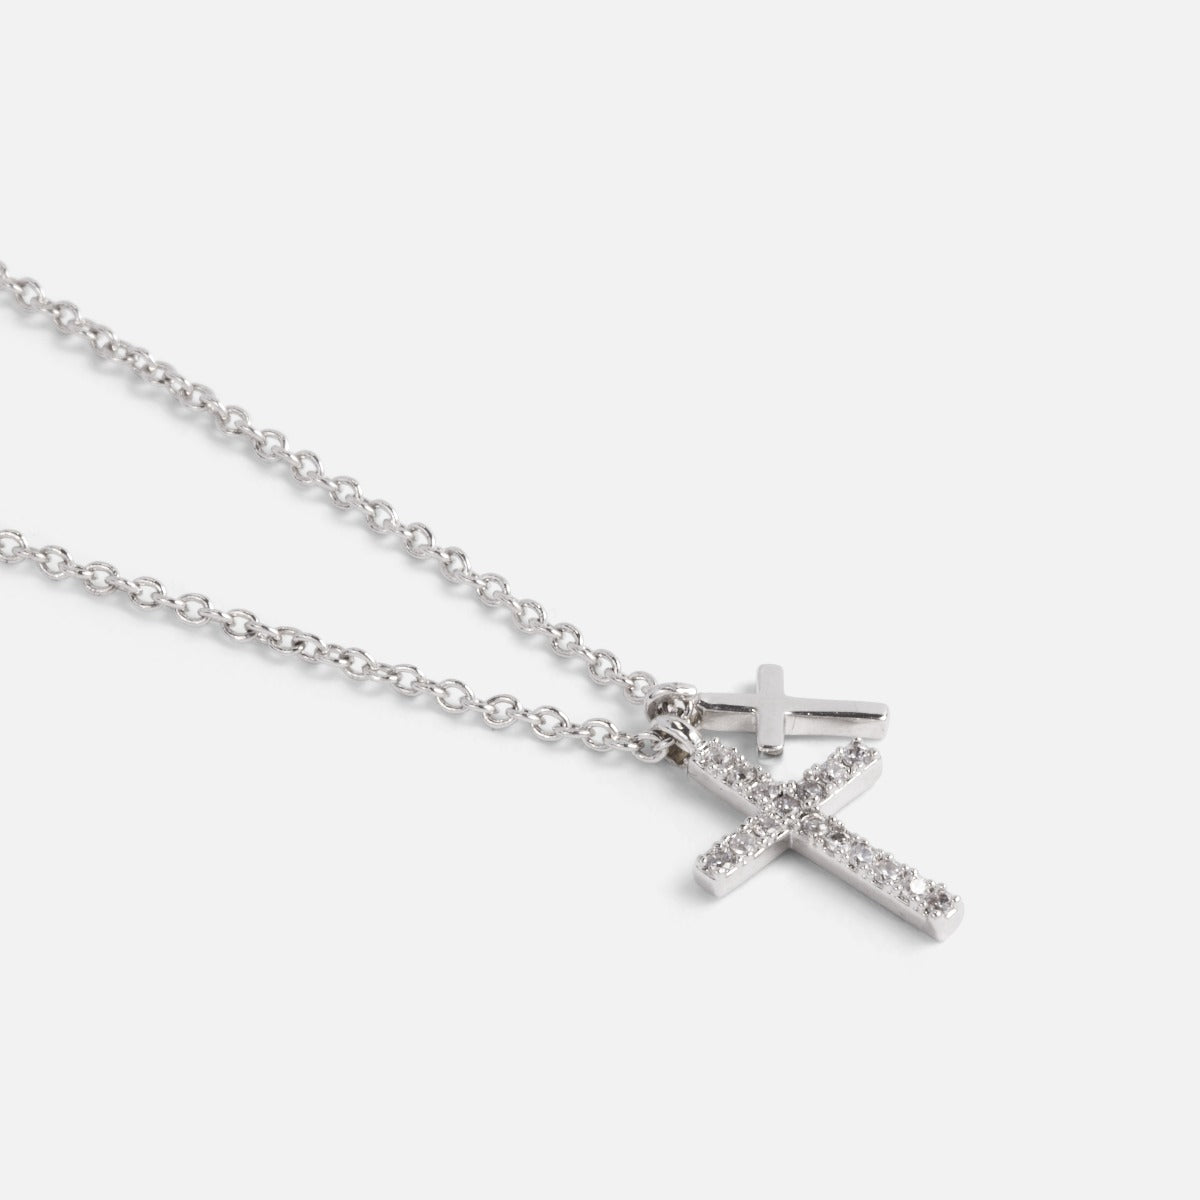 Necklace with cross shaped pendants and cubic zirconia stones